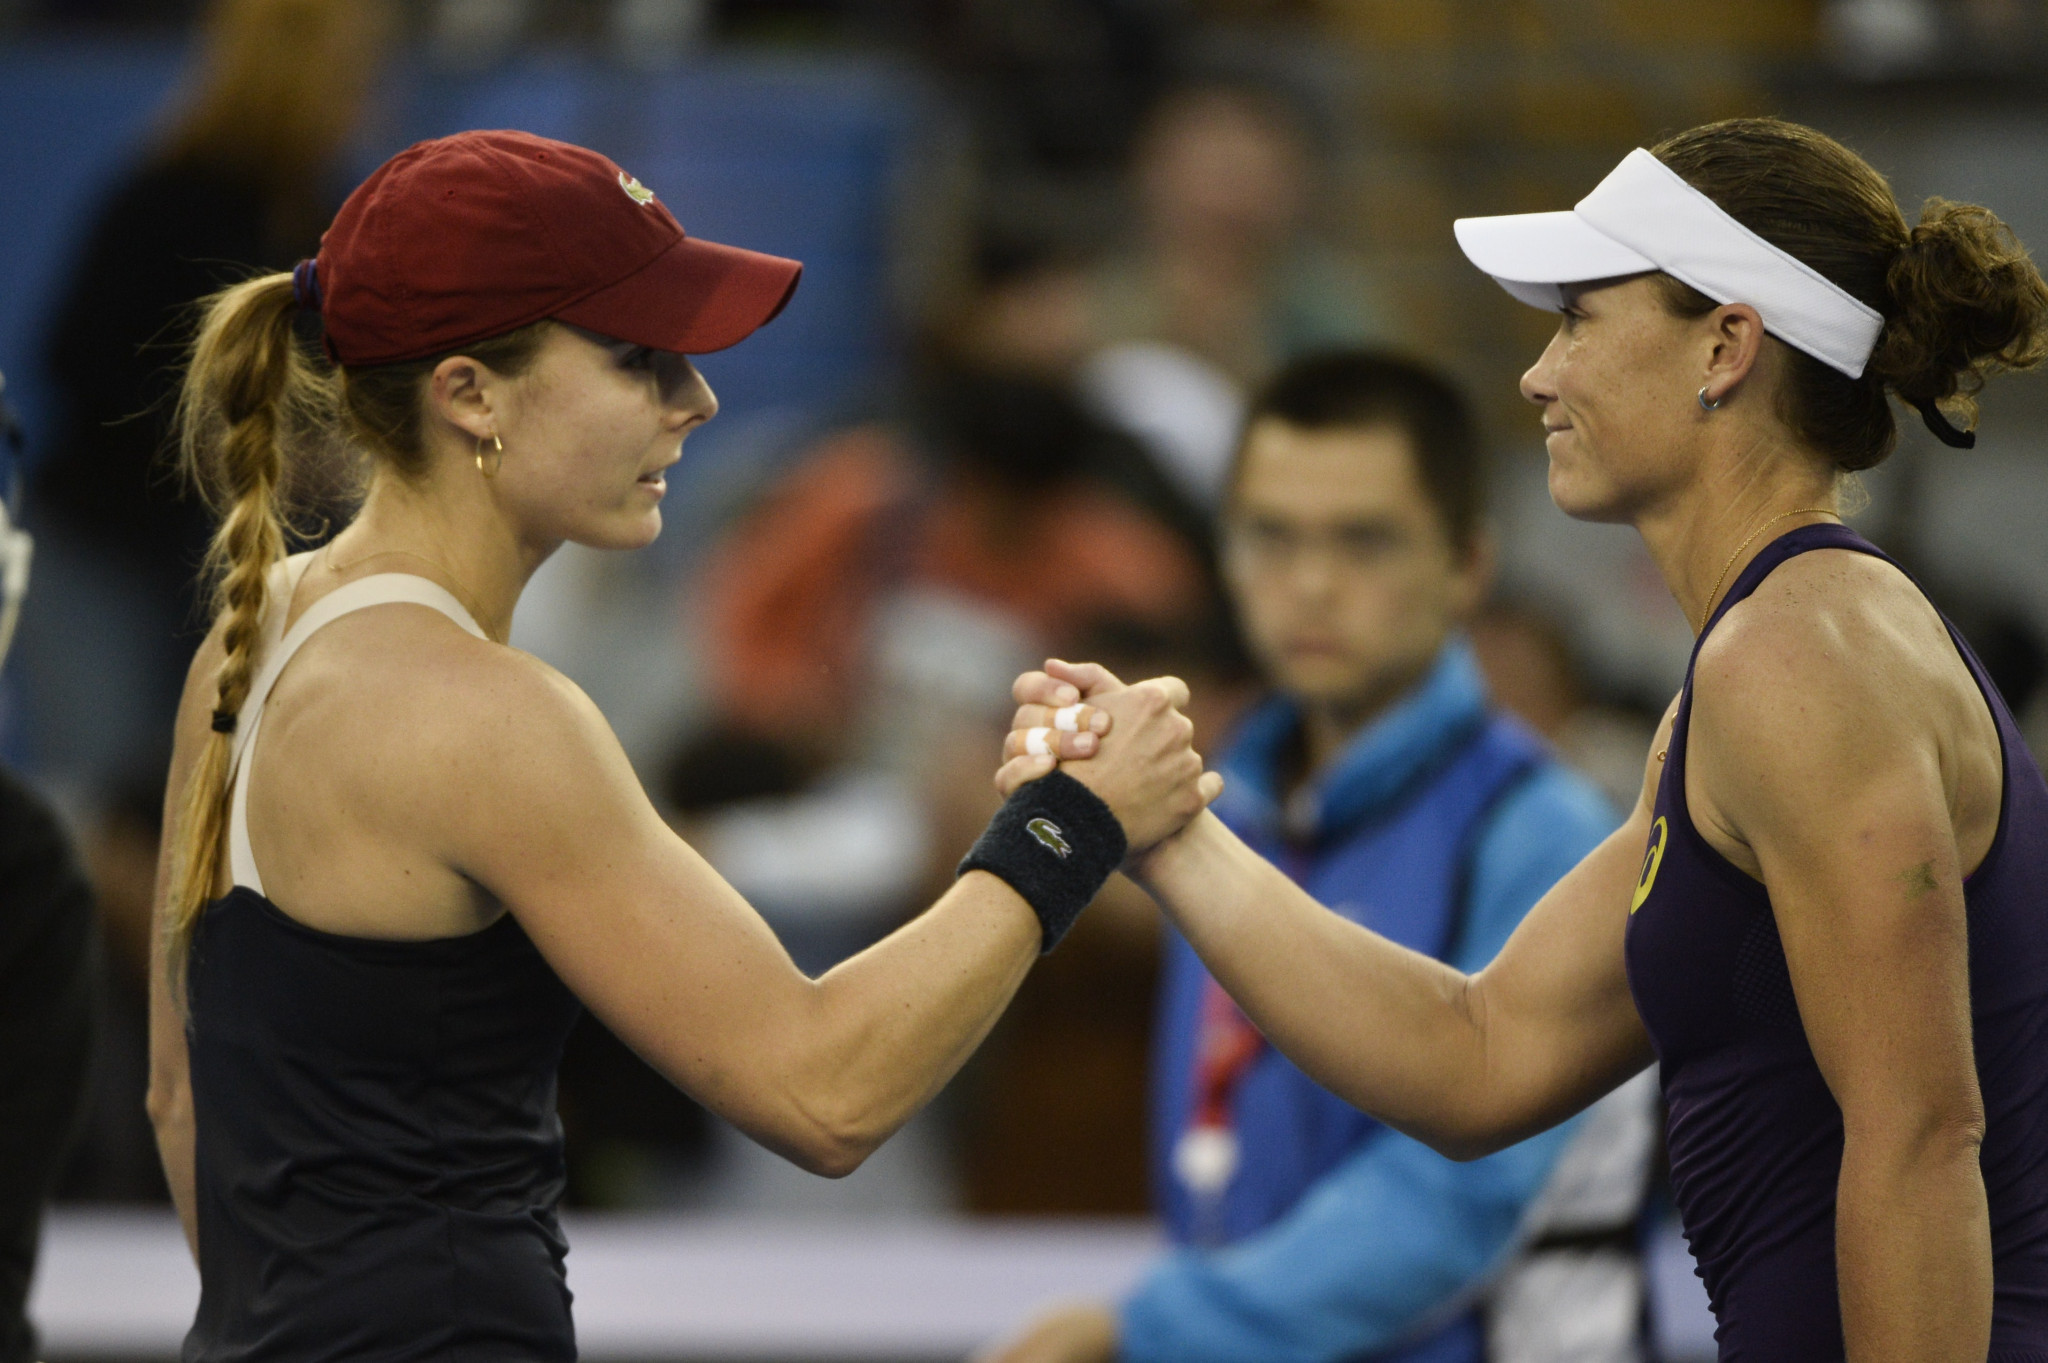 Alizé Cornet and Sam Stosur are to partner at the Australian Open ©Getty Images